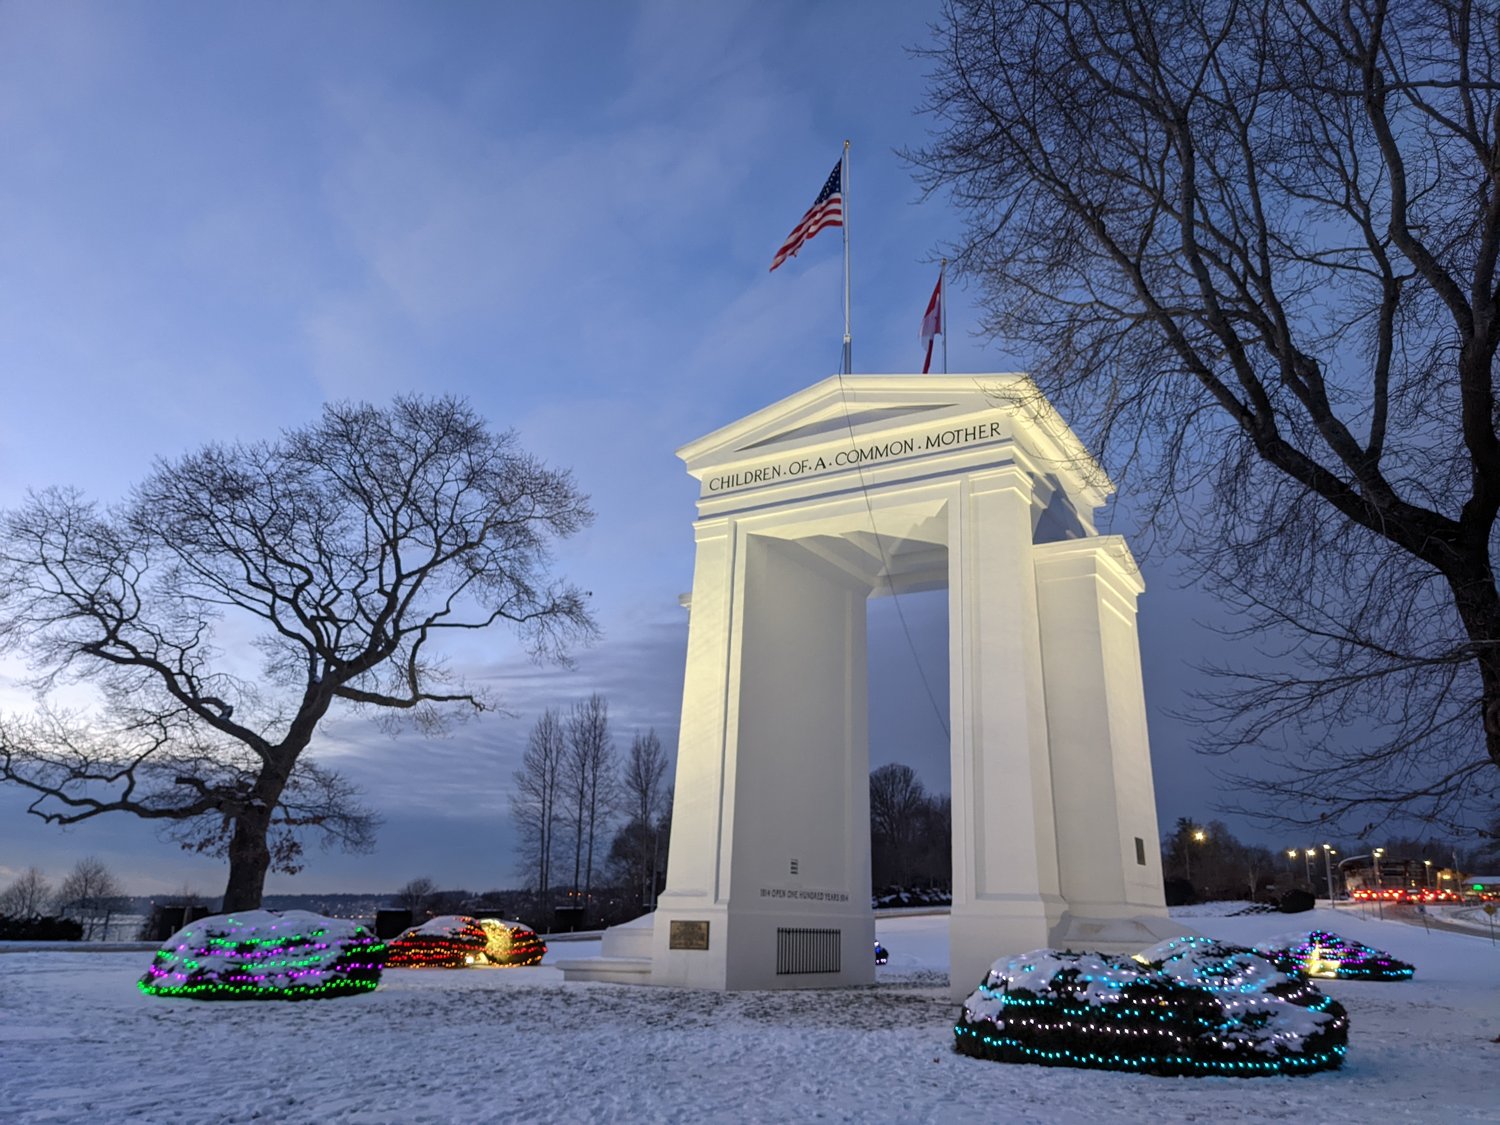 International Peace Arch Association’s holiday lights brighten the snow-blanketed Peace Arch at the U.S./Canada border December 28.